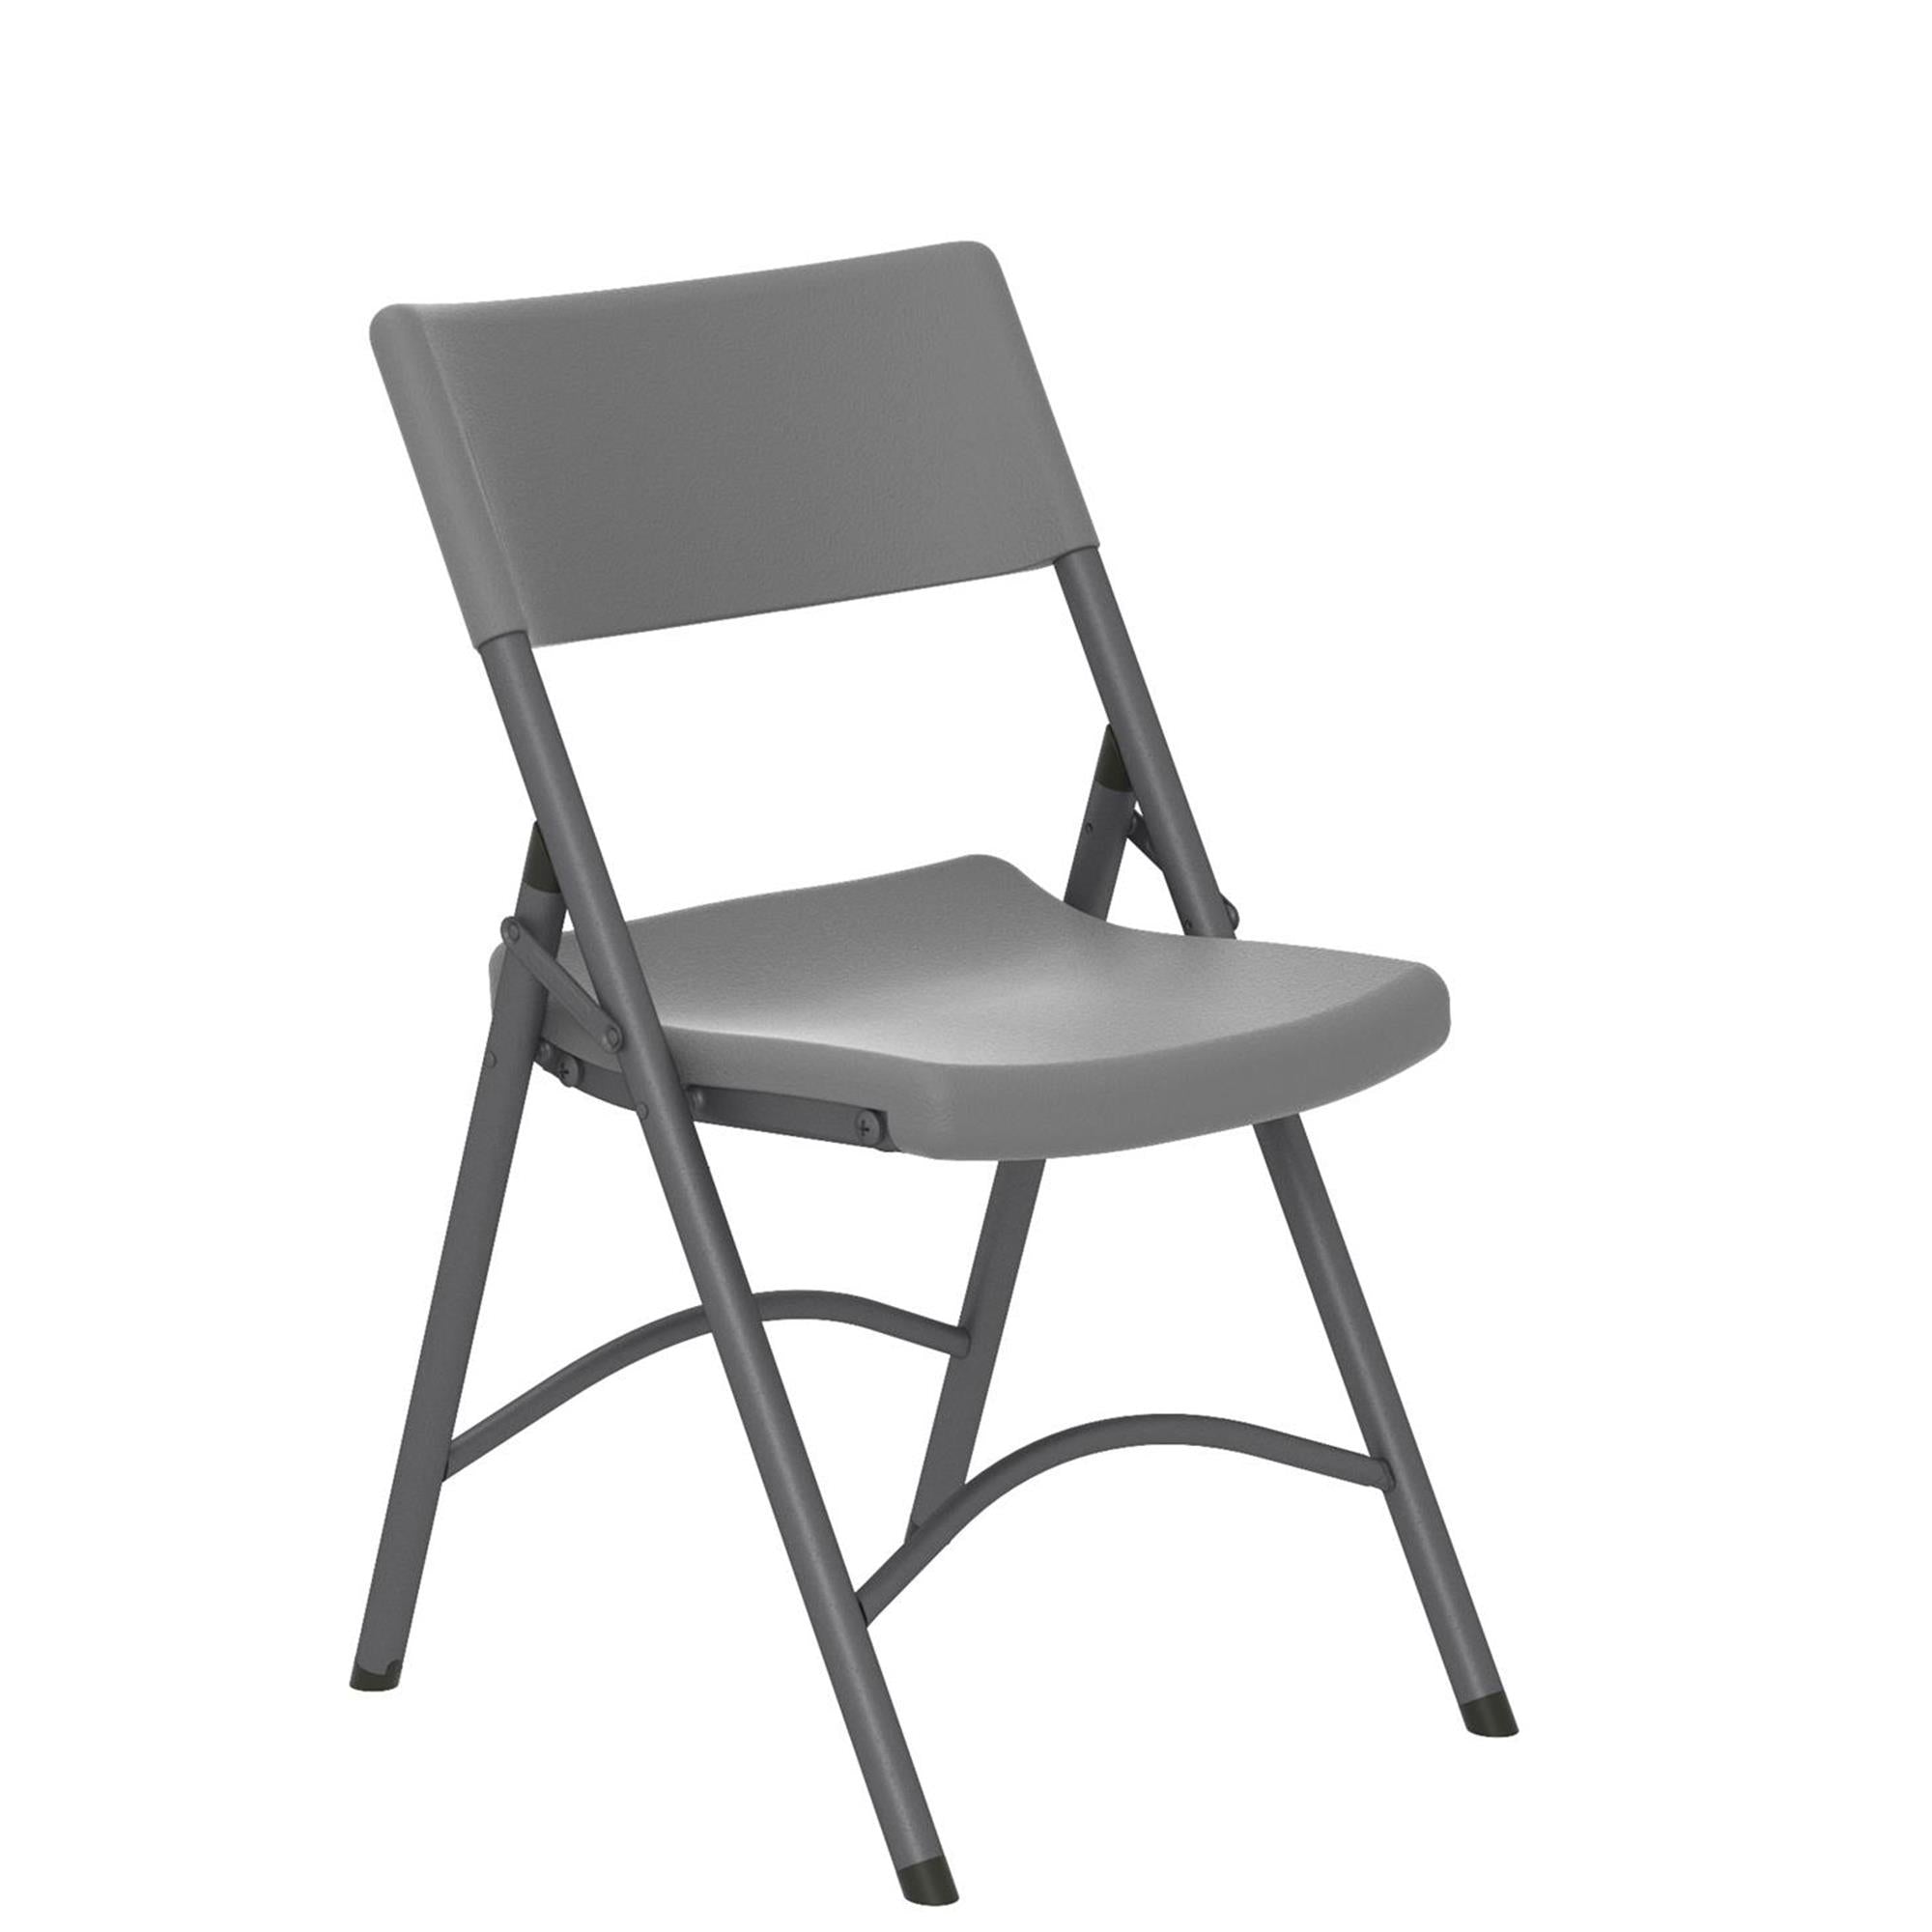 Commercial Resin Folding Chair with Steel Frame - Gray - 4-Pack